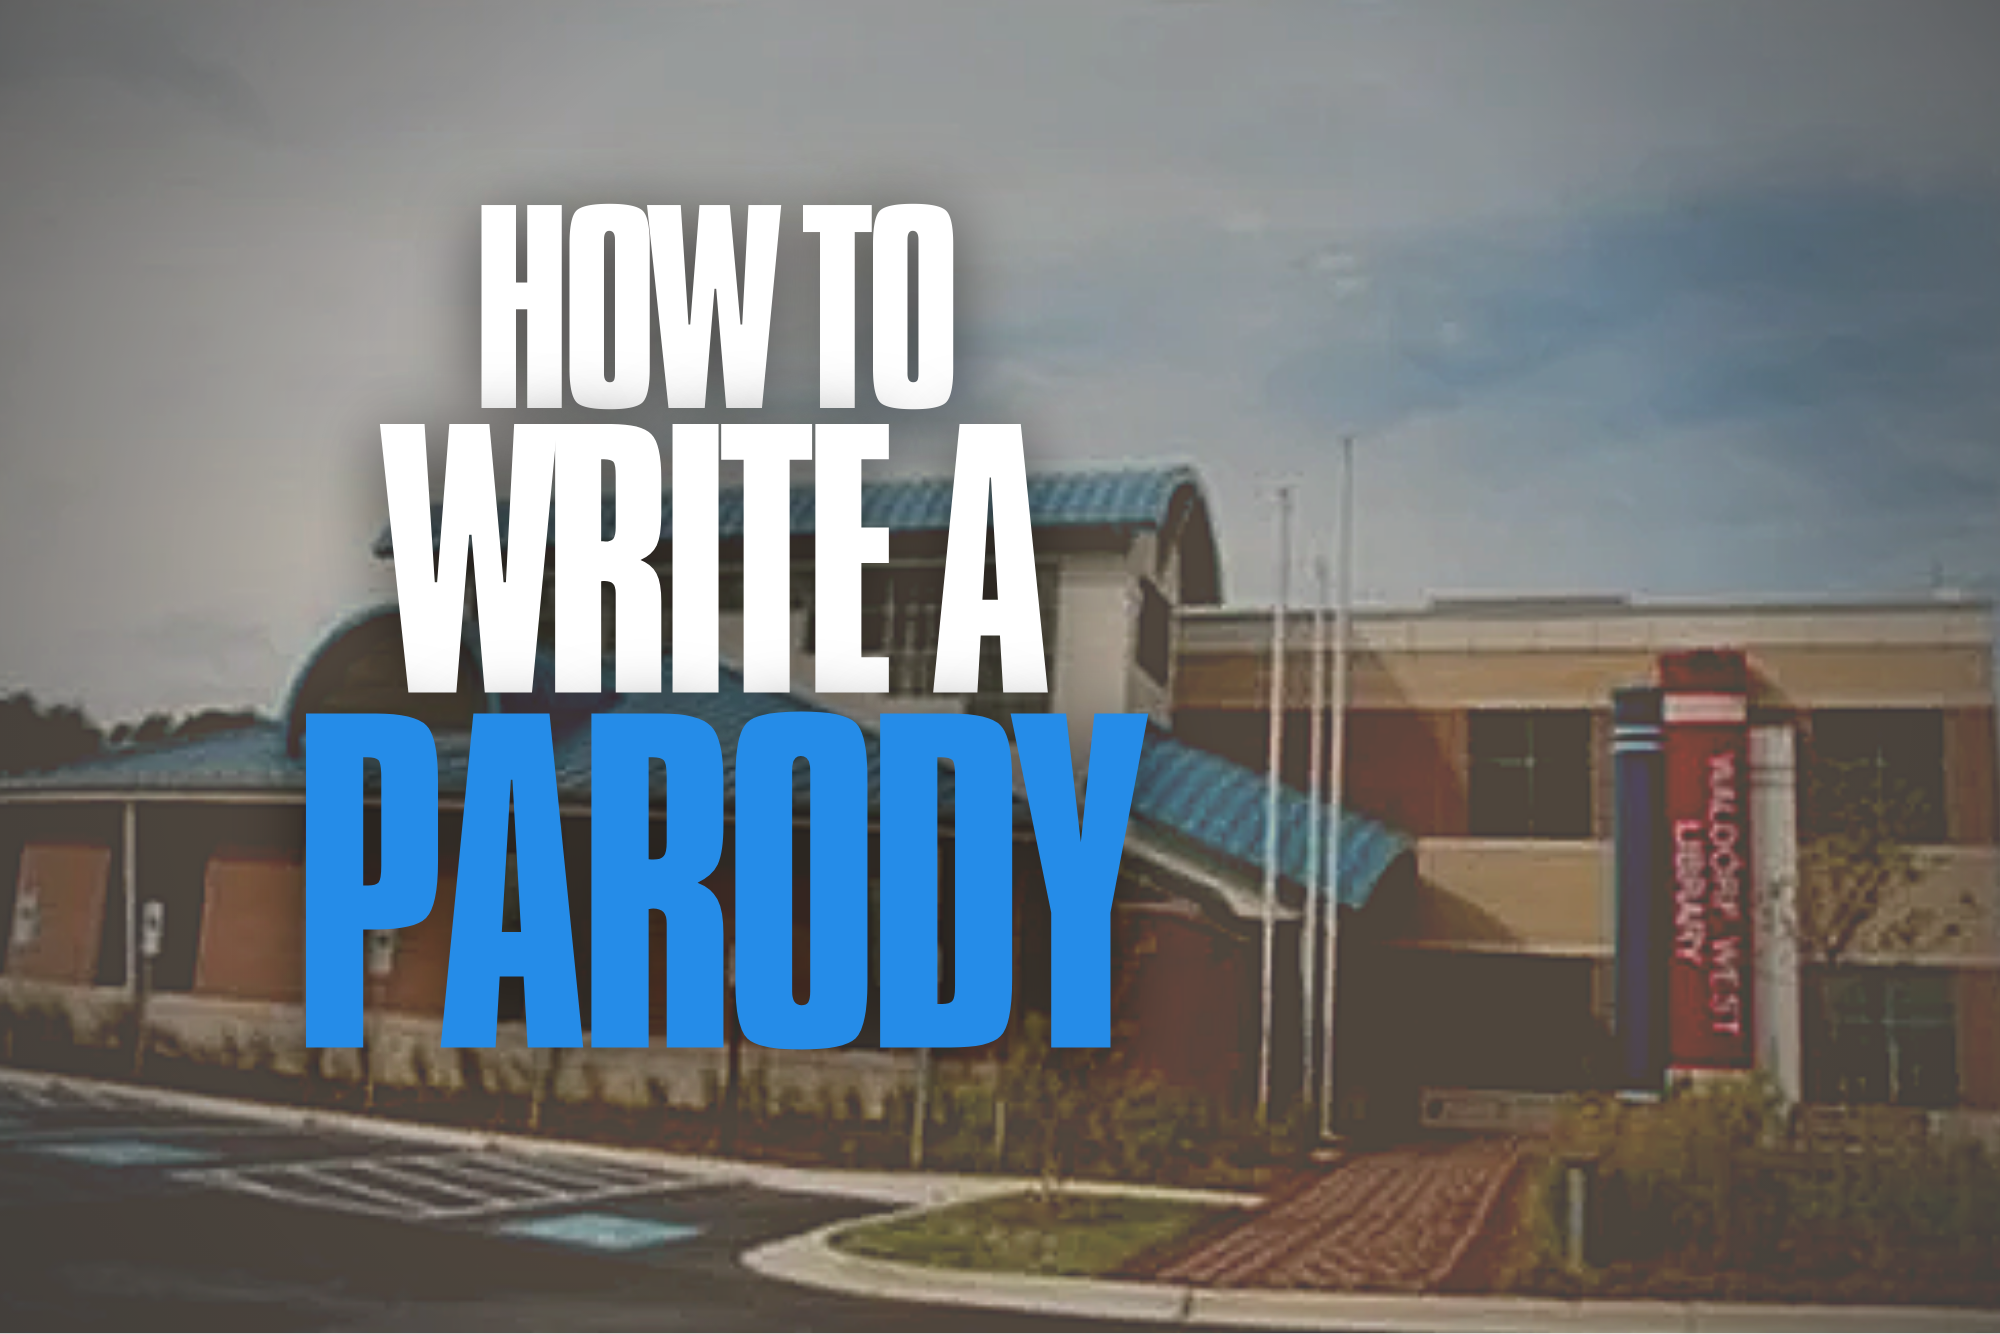 How to Write a Parody – Charles County Public Library